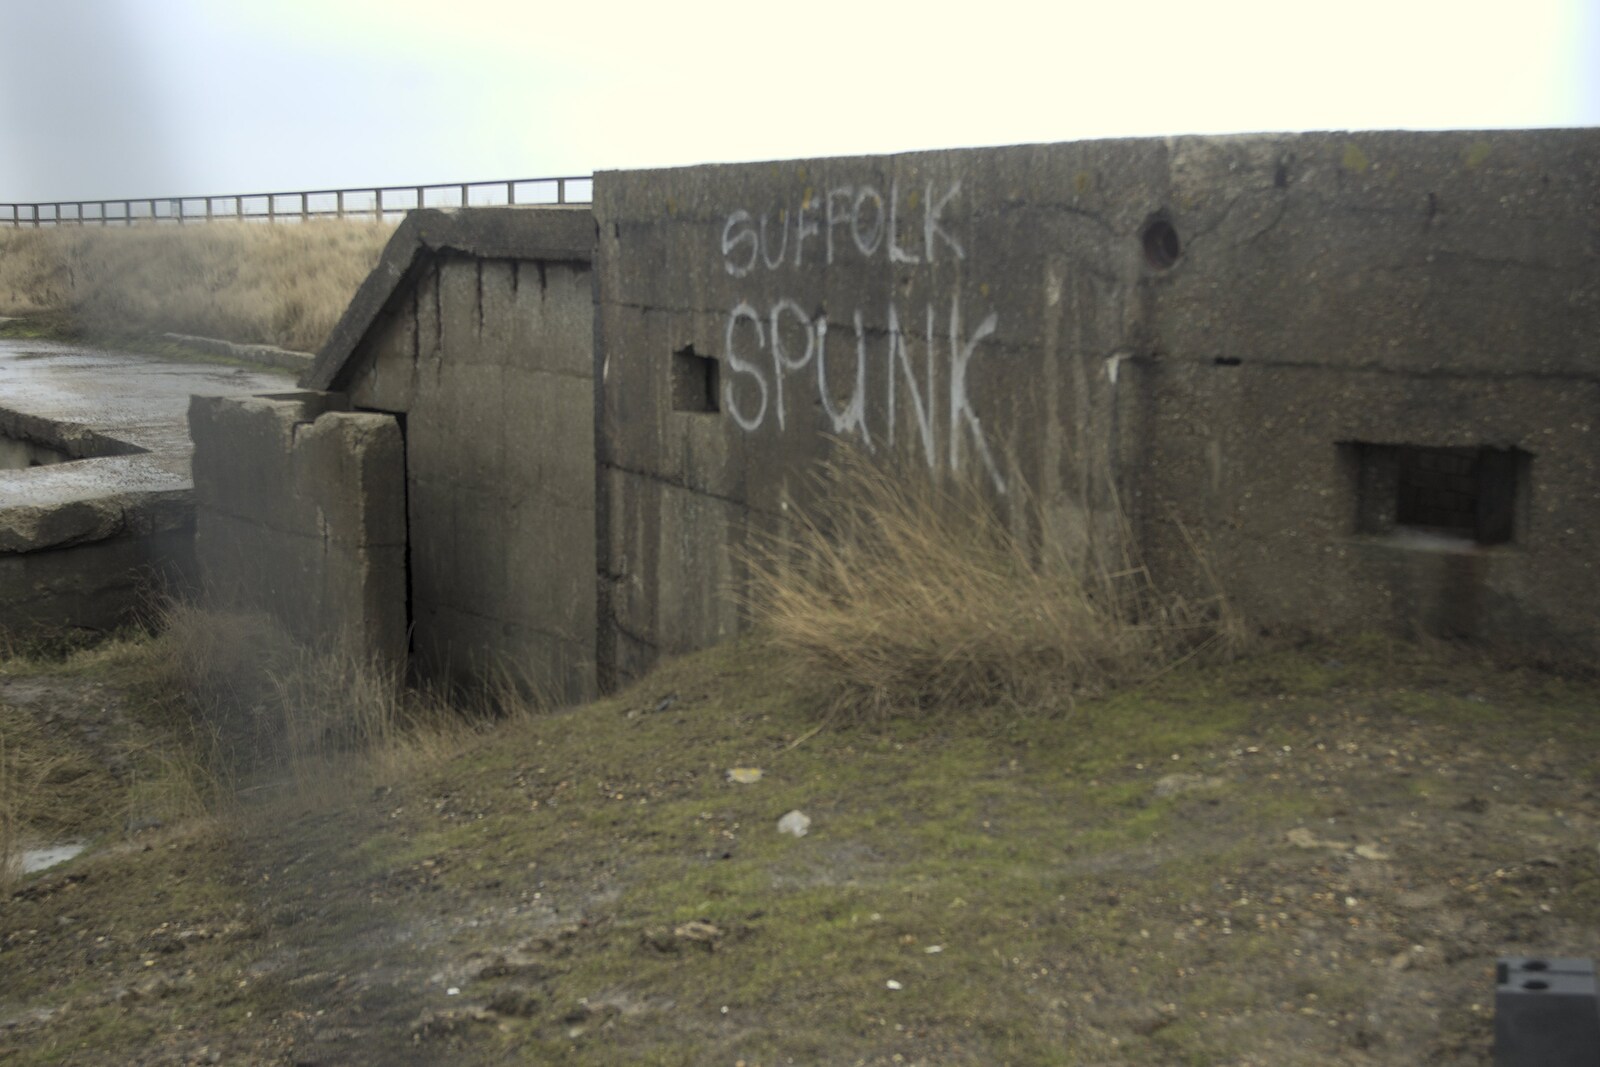 Partisan graffiti from The BBs with Ed Sheeran, Fred's Haircut, and East Lane, Diss, Ipswich and Bawdsey  - 21st February 2010